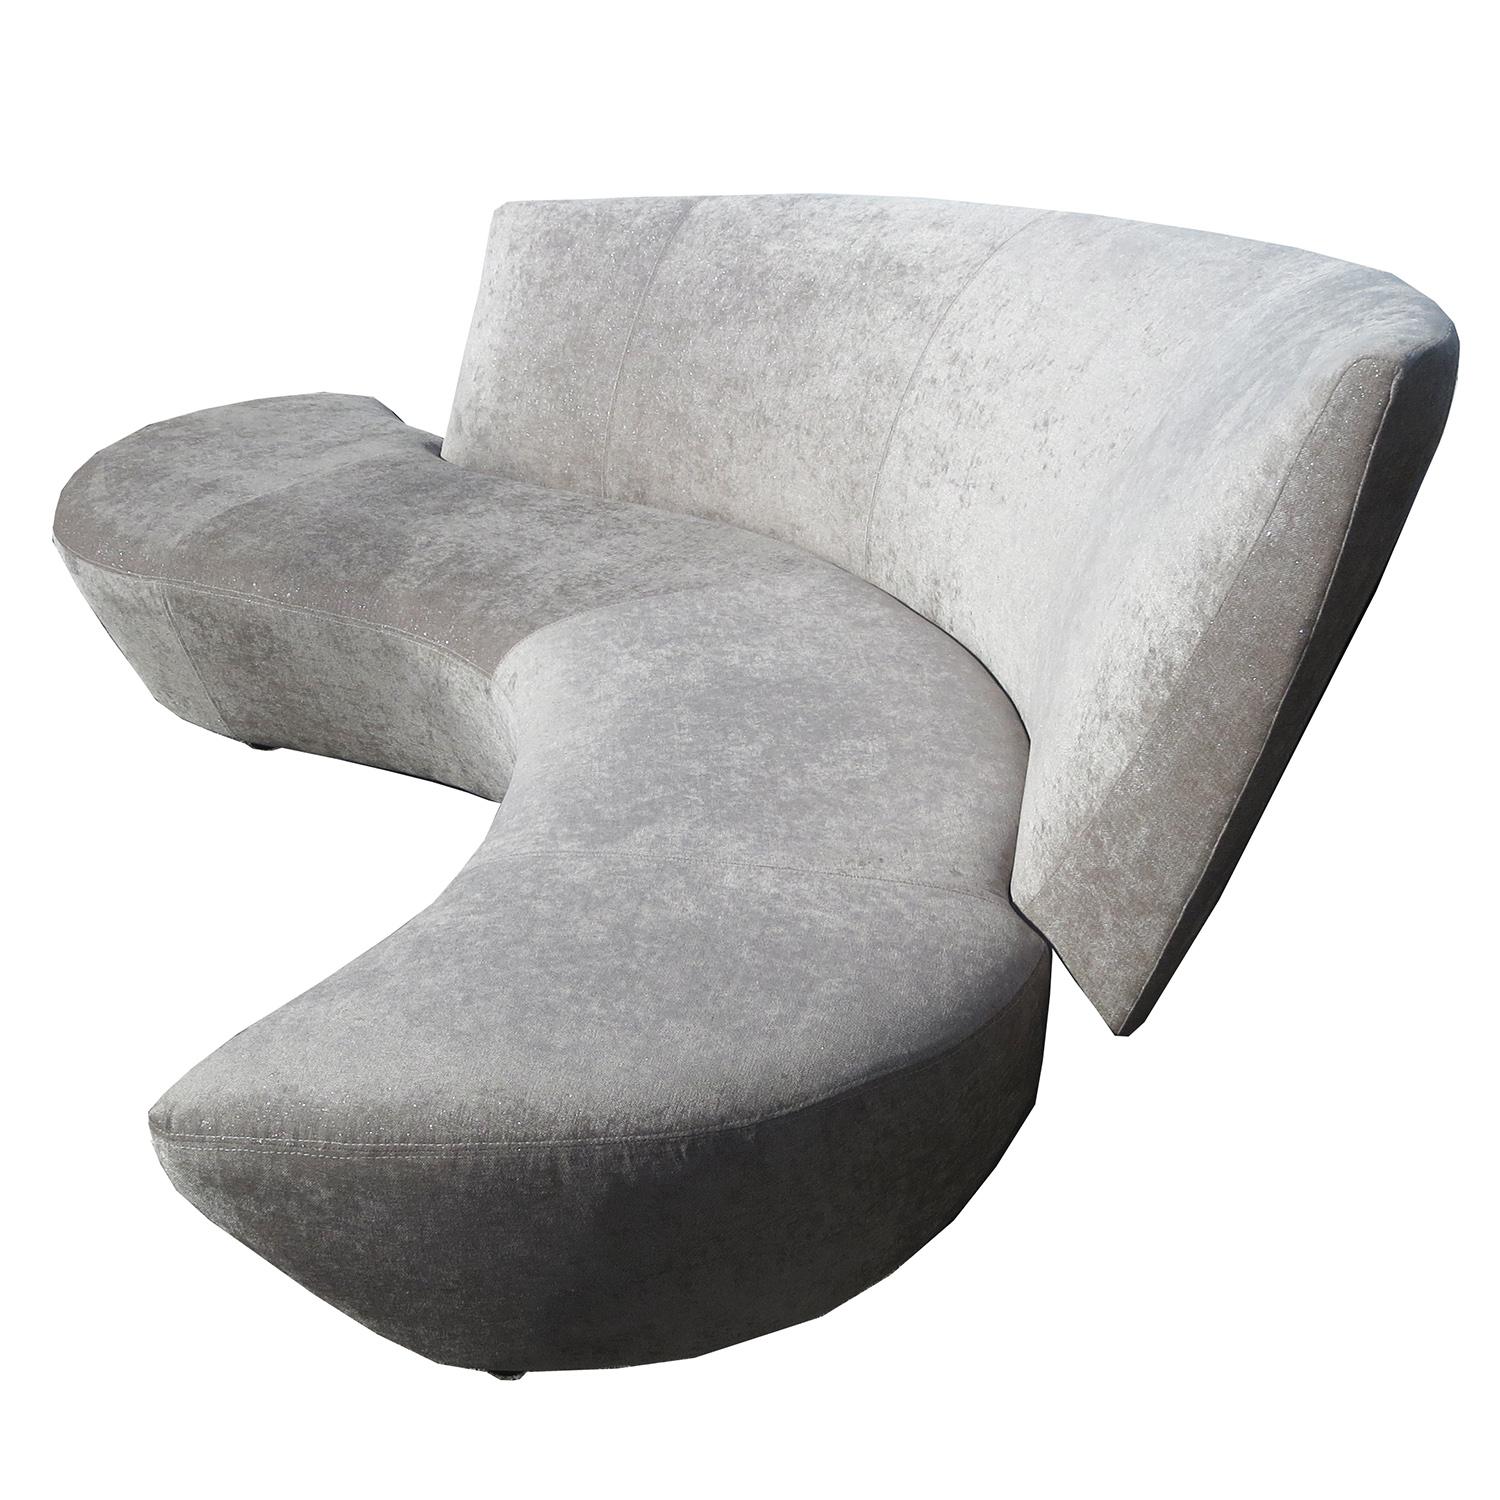 This undulating serpentine sofa was inspired by Frank Gehry's Bilbao Museum of Spain. Kagan combined angular and curved forms to create a unique design in seating luxury. We have re-upholstered the sofa in a taupe chenille fabric shot with silver